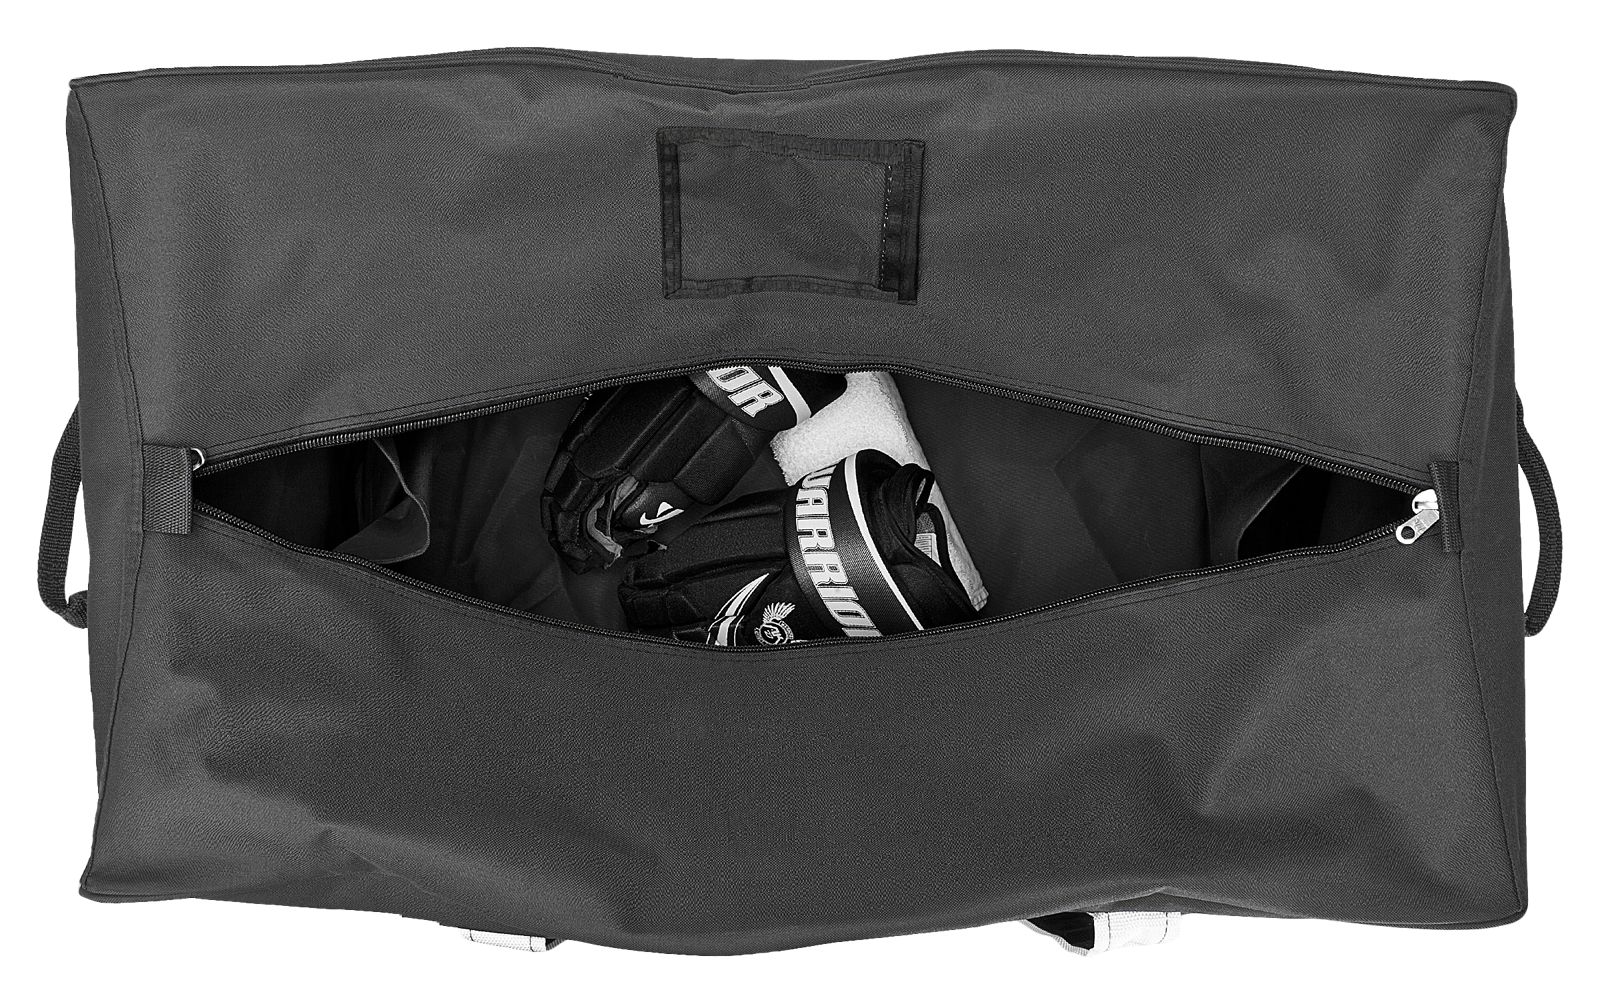 Team Duffel Bag Large, Black with White image number 4